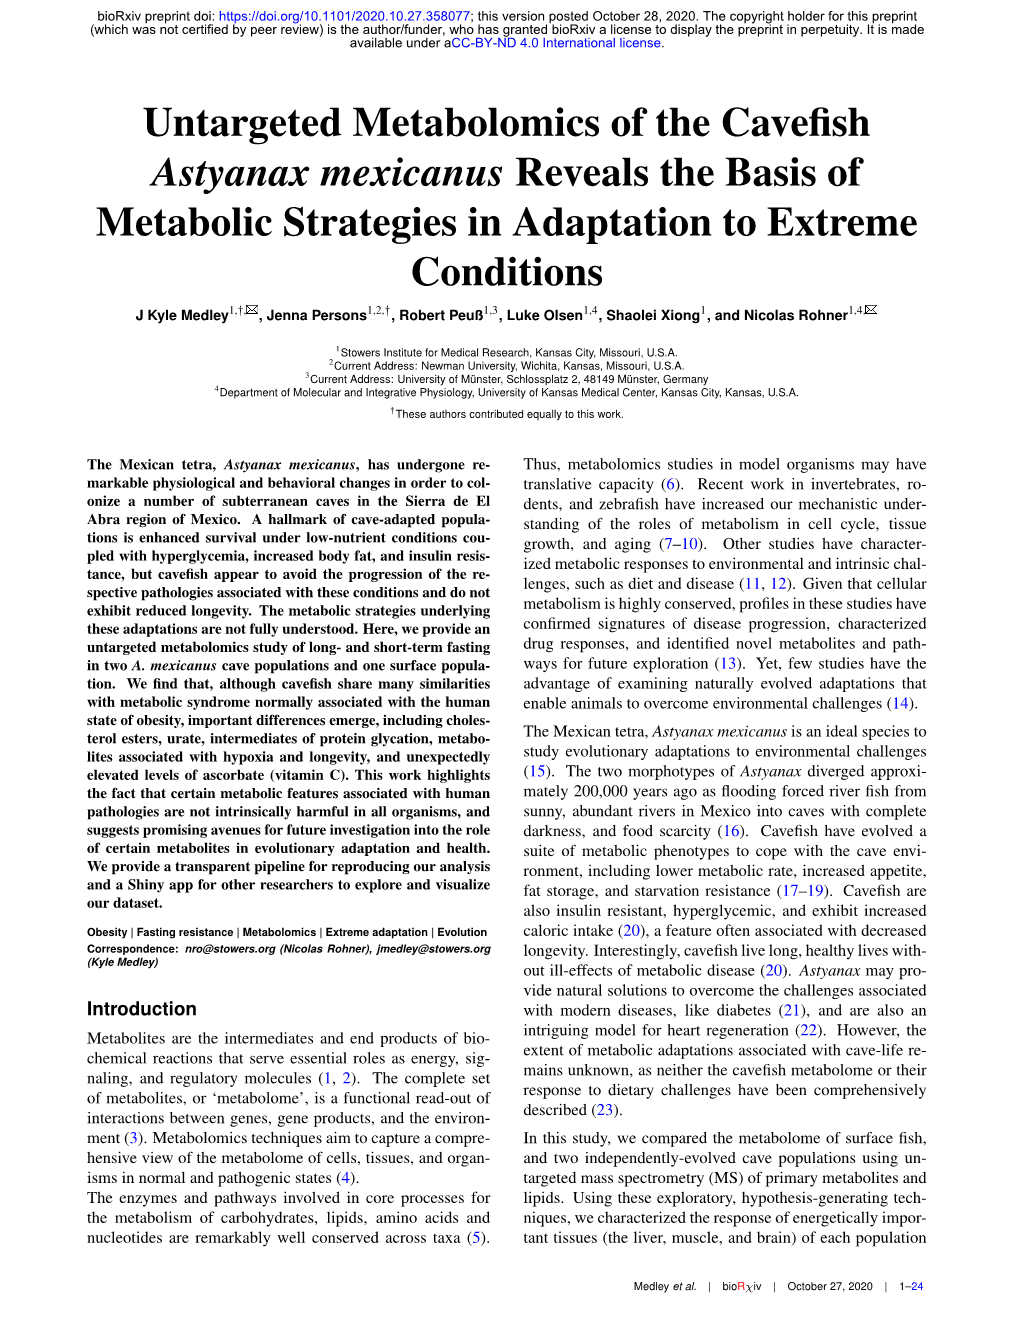 Untargeted Metabolomics of the Cavefish Astyanax Mexicanus